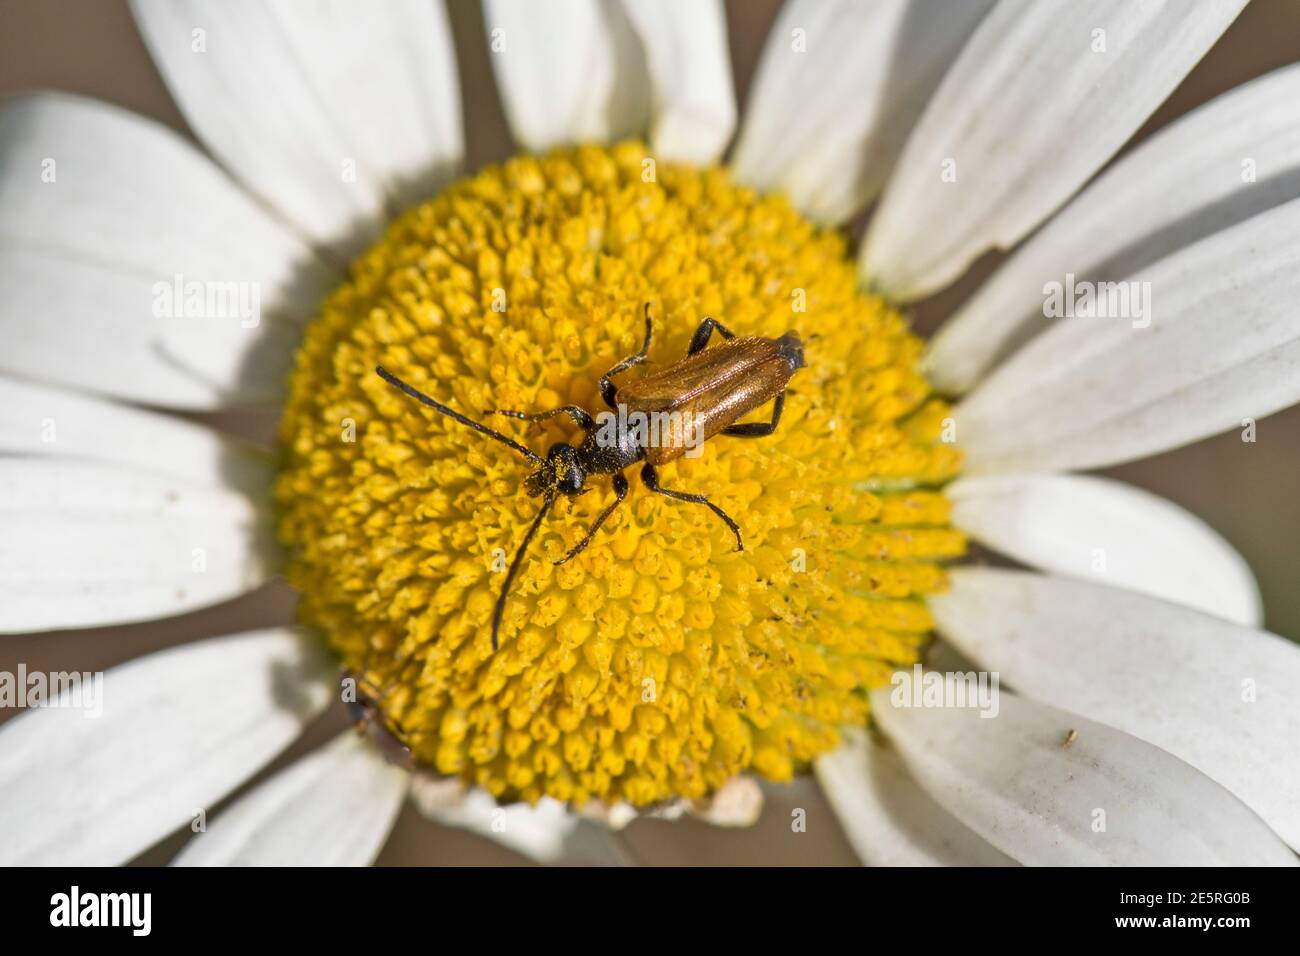 A lonhorn beetle (Paracorymbia maculicornis) adult on the disc flowers of an oxeye daisy, Berkshire, June Stock Photo